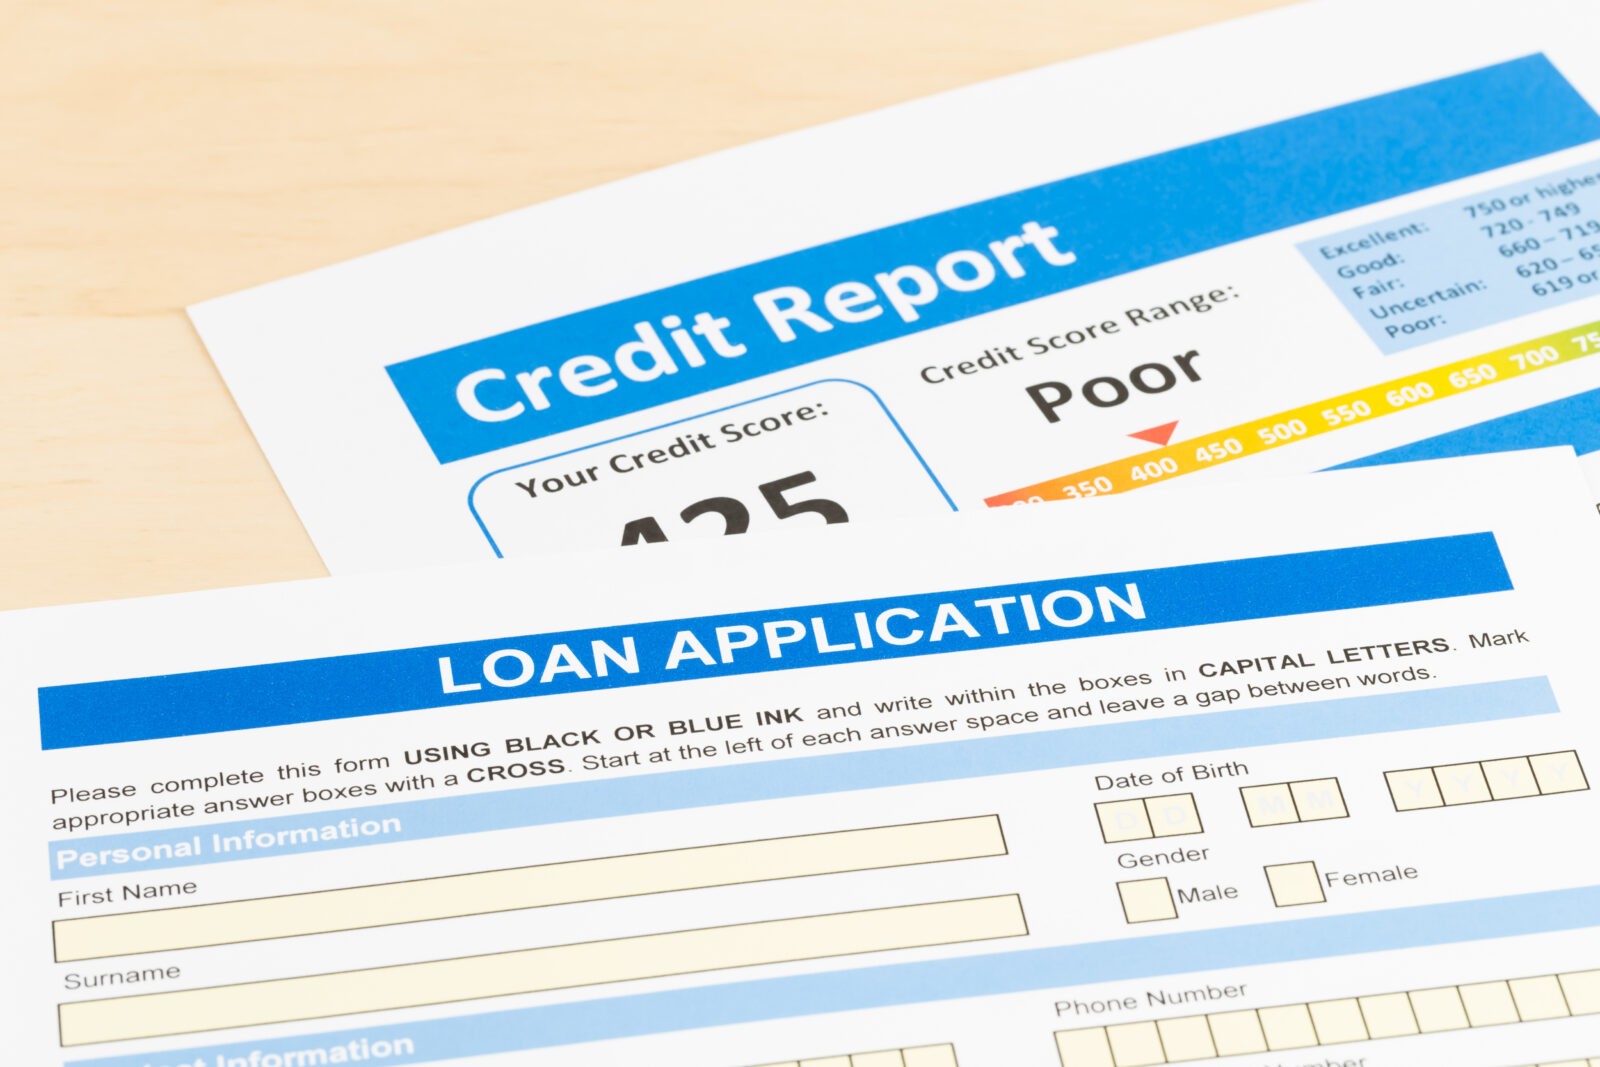 Can I Get a Loan with Bad Credit?